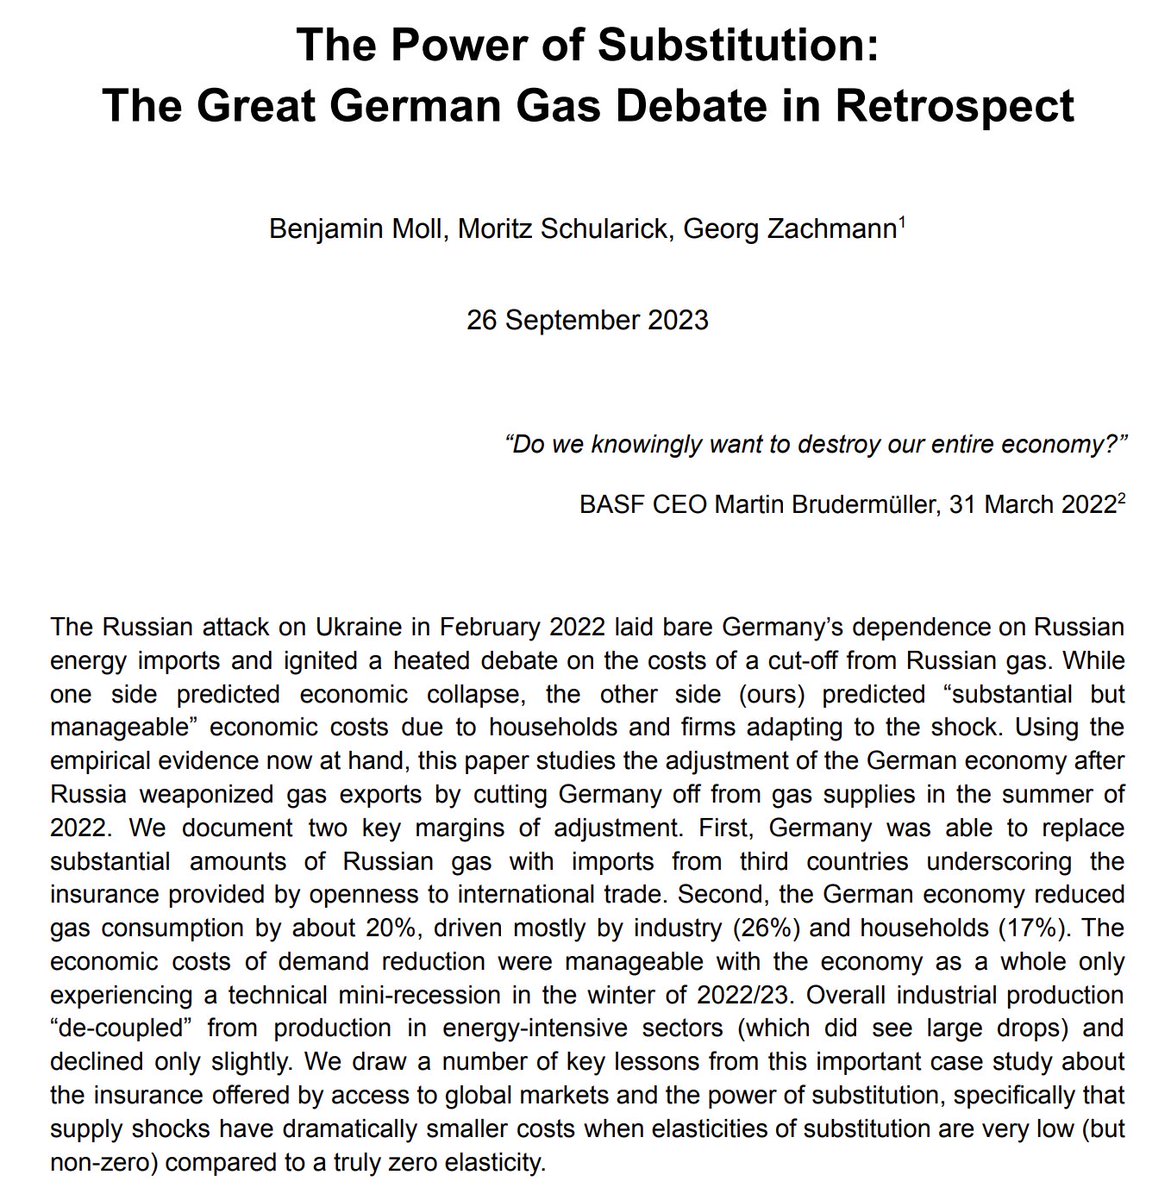 'The Power of Substitution: The Great German Gas Debate in Retrospect' with @MSchularick and @GeorgZachmann Presentation tomorrow at 11:30am ET at @BrookingsEcon conference. Live stream brookings.edu/events/bpea-fa… Draft: brookings.edu/wp-content/upl… Slides: benjaminmoll.com/GGGD_slides/